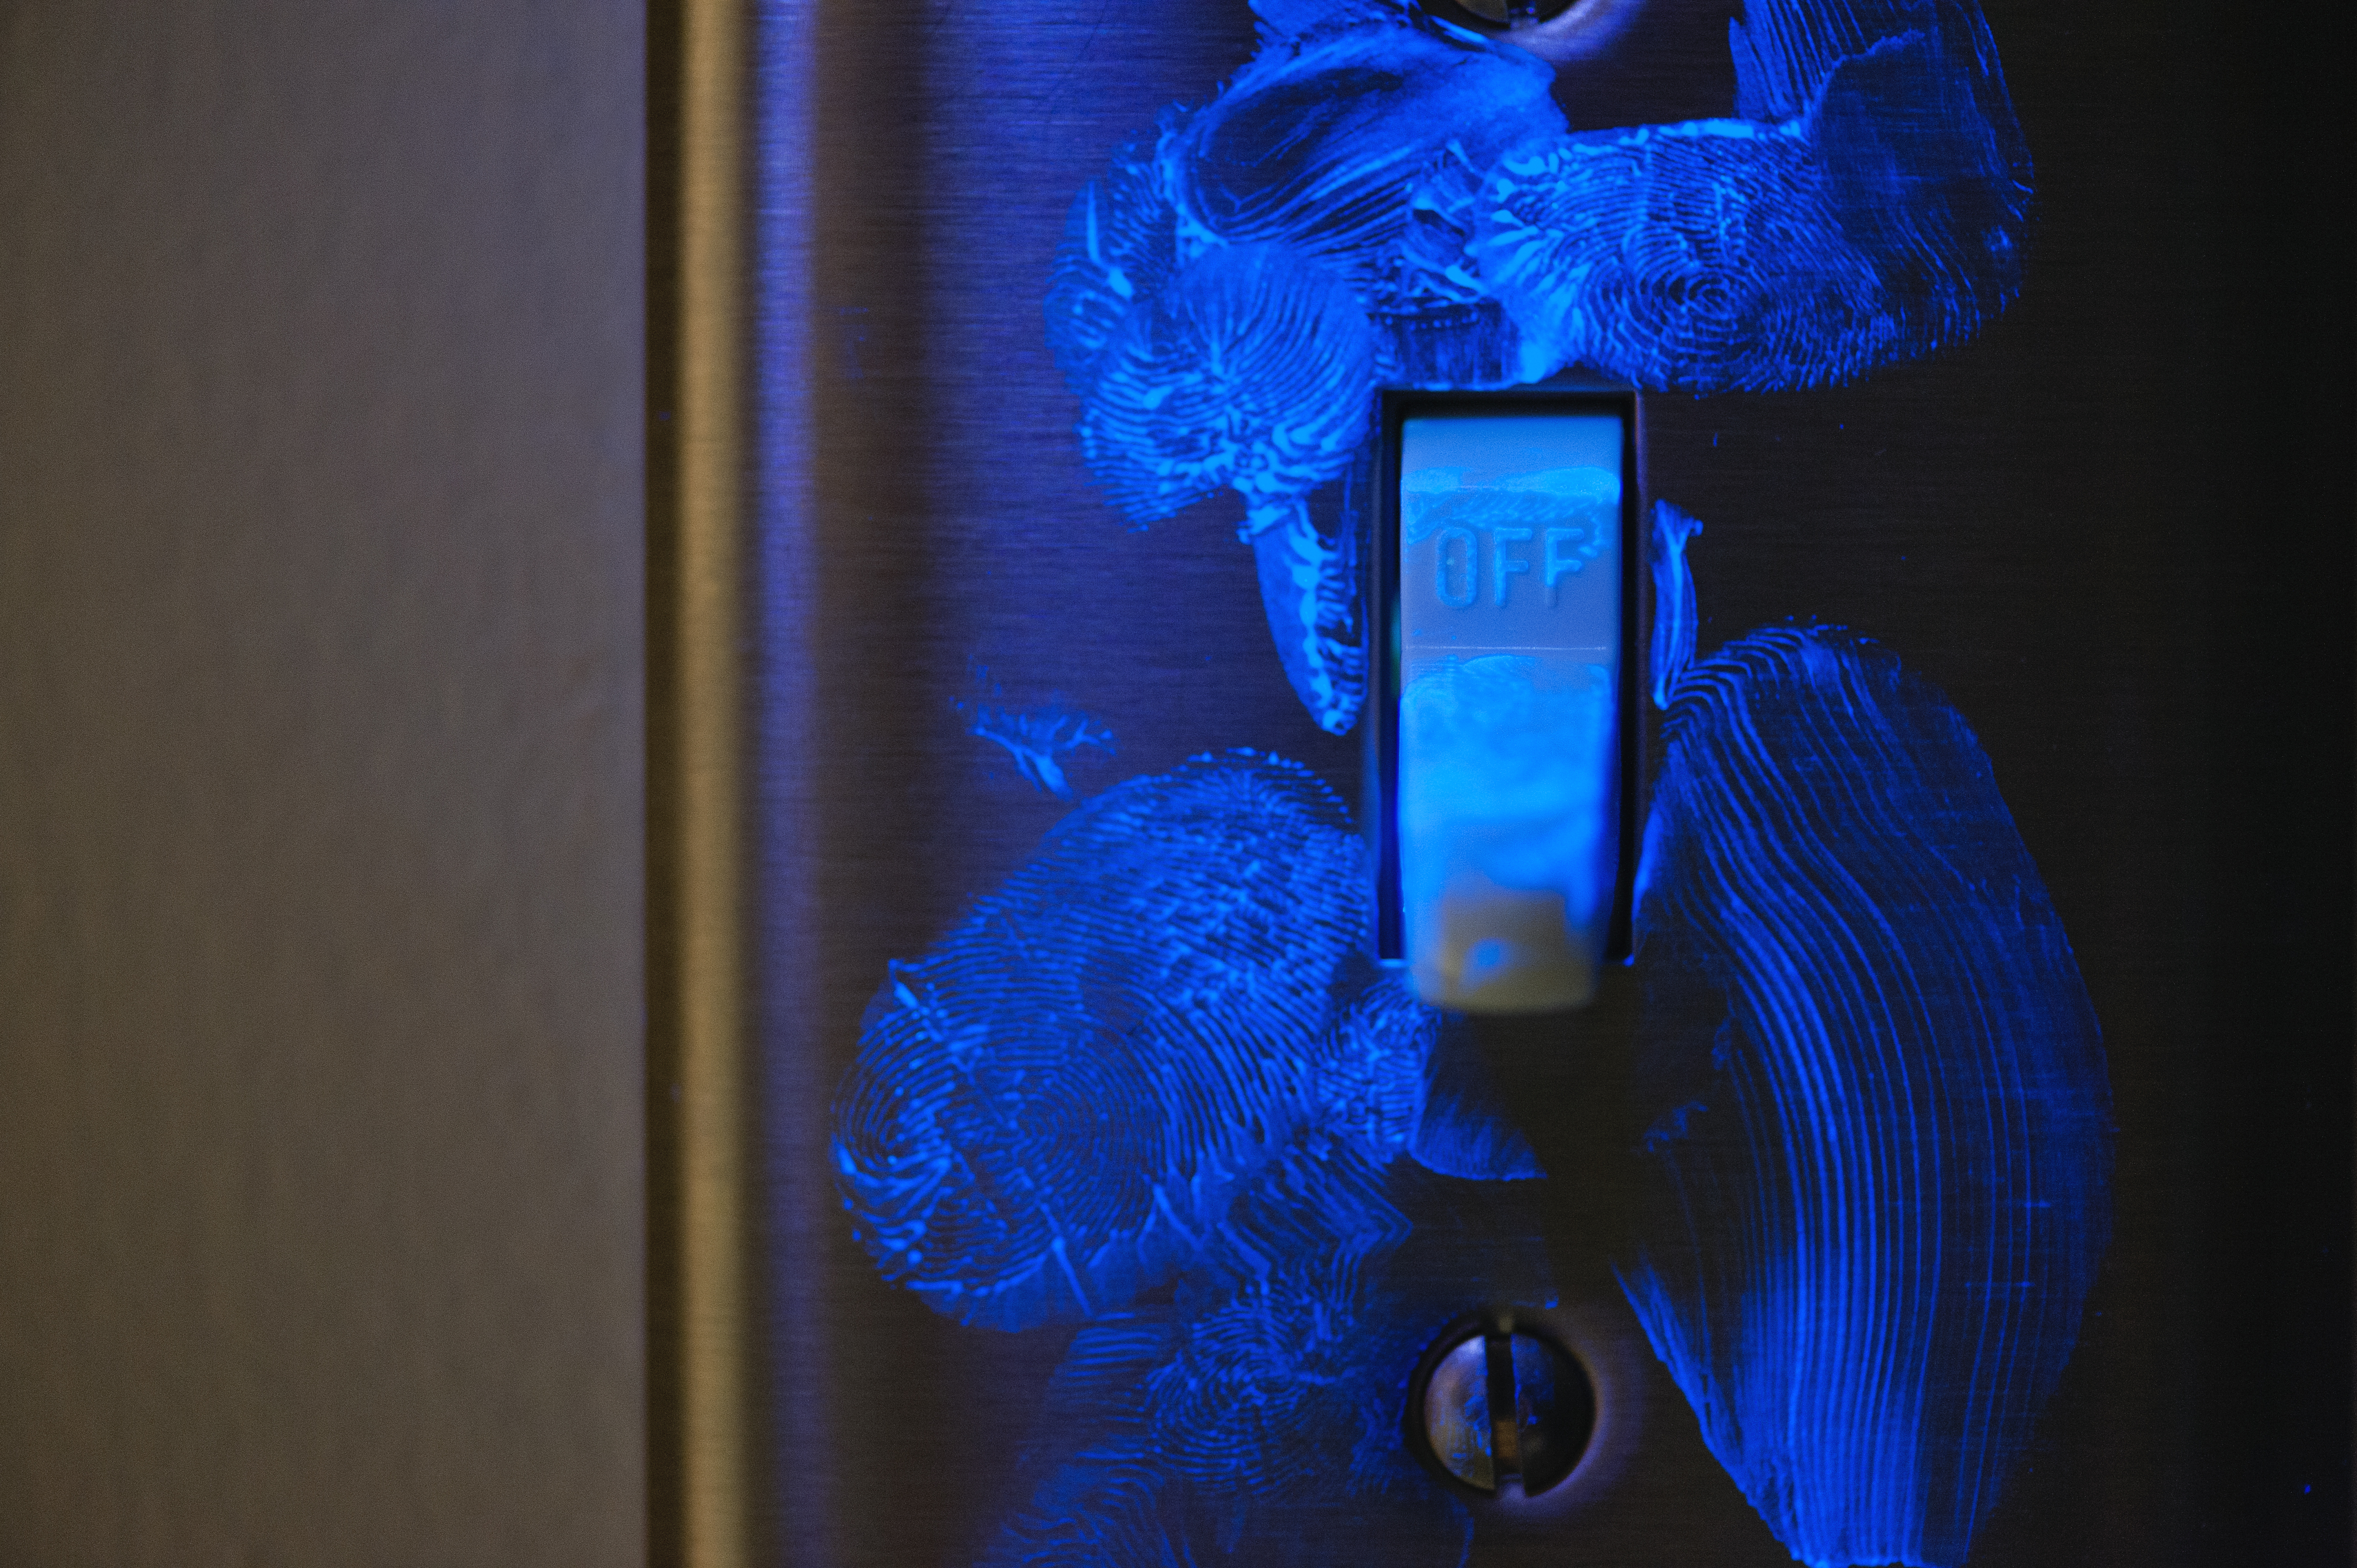 Germ infested light switch